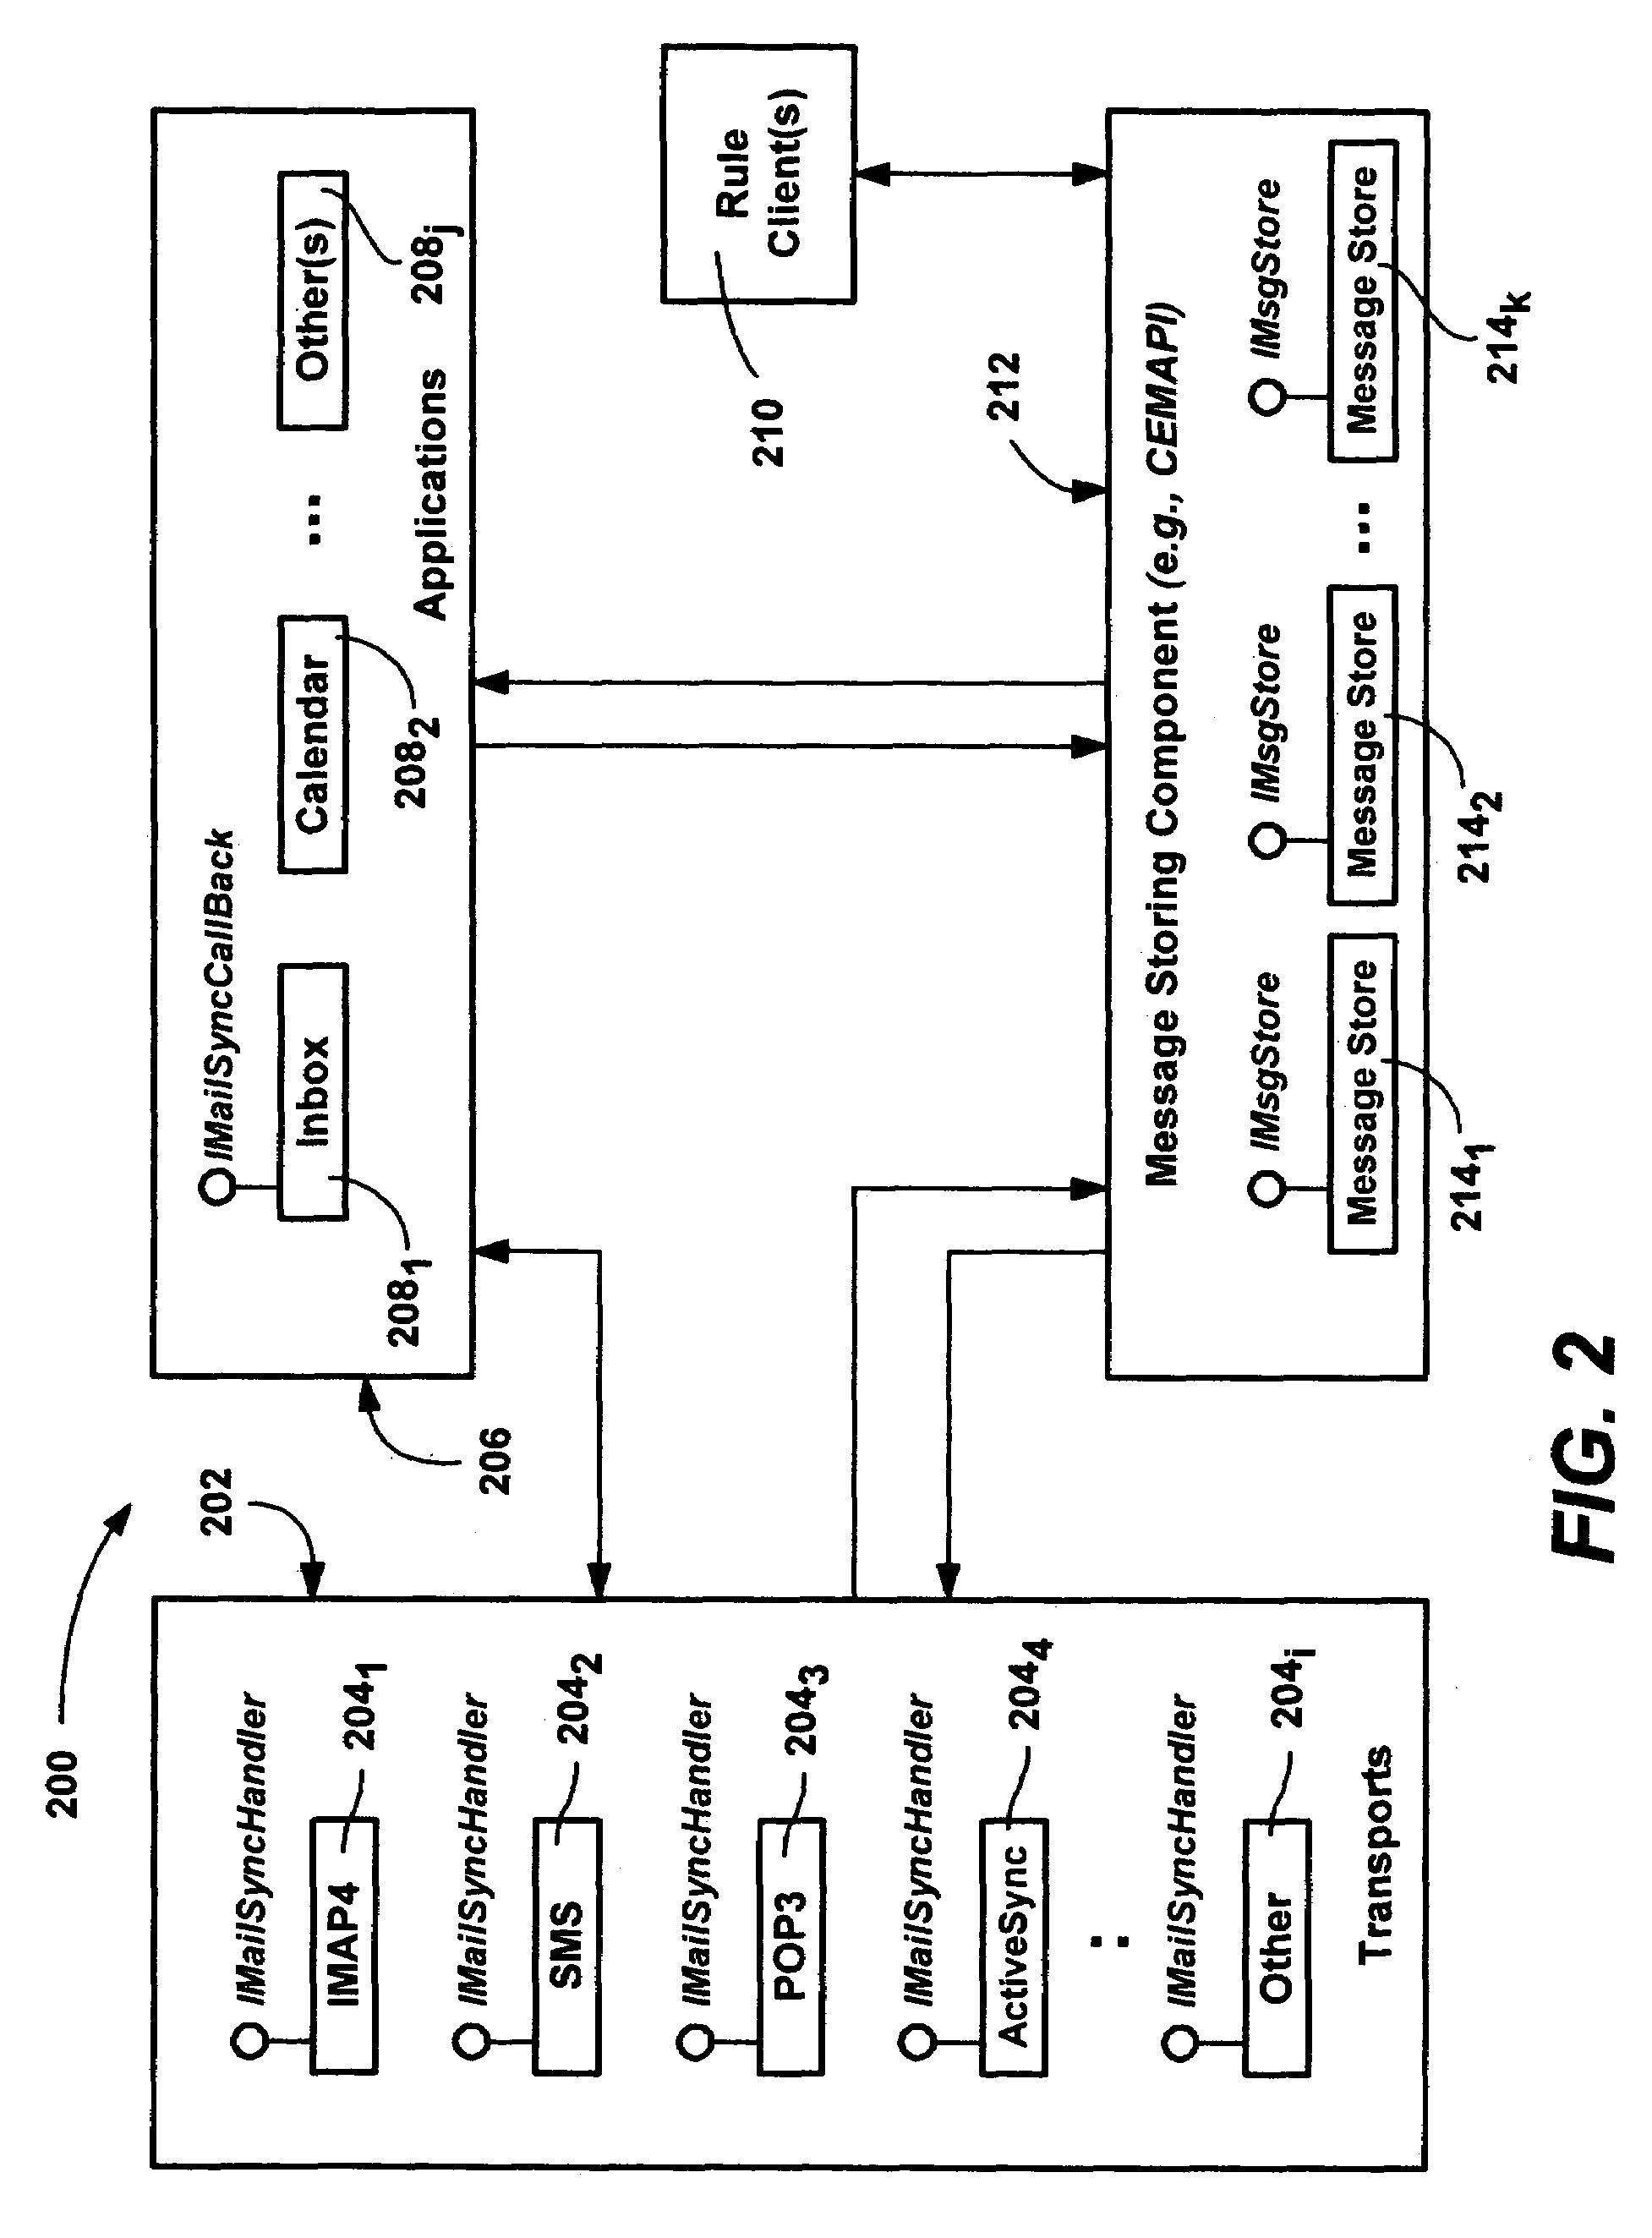 Rules interface for implementing message rules on a mobile computing device